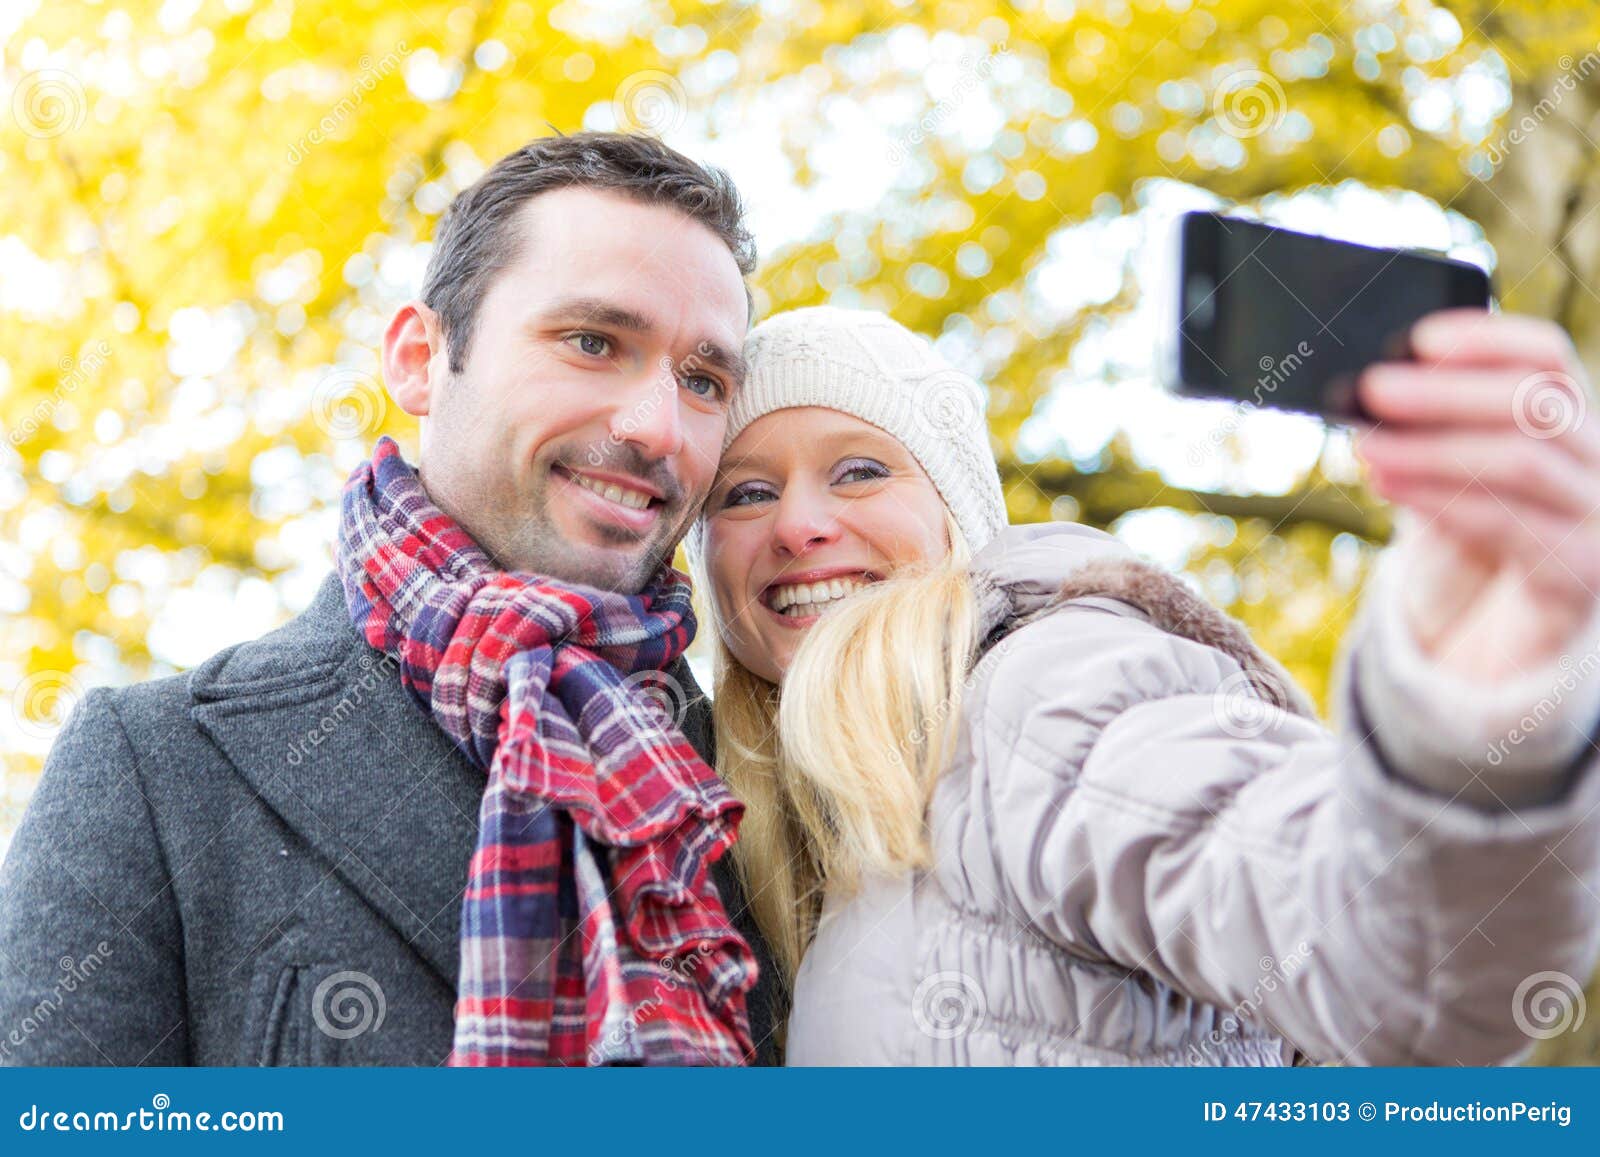 Young Attractive Couple Taking Selfie In A Parc Stock Image Image Of